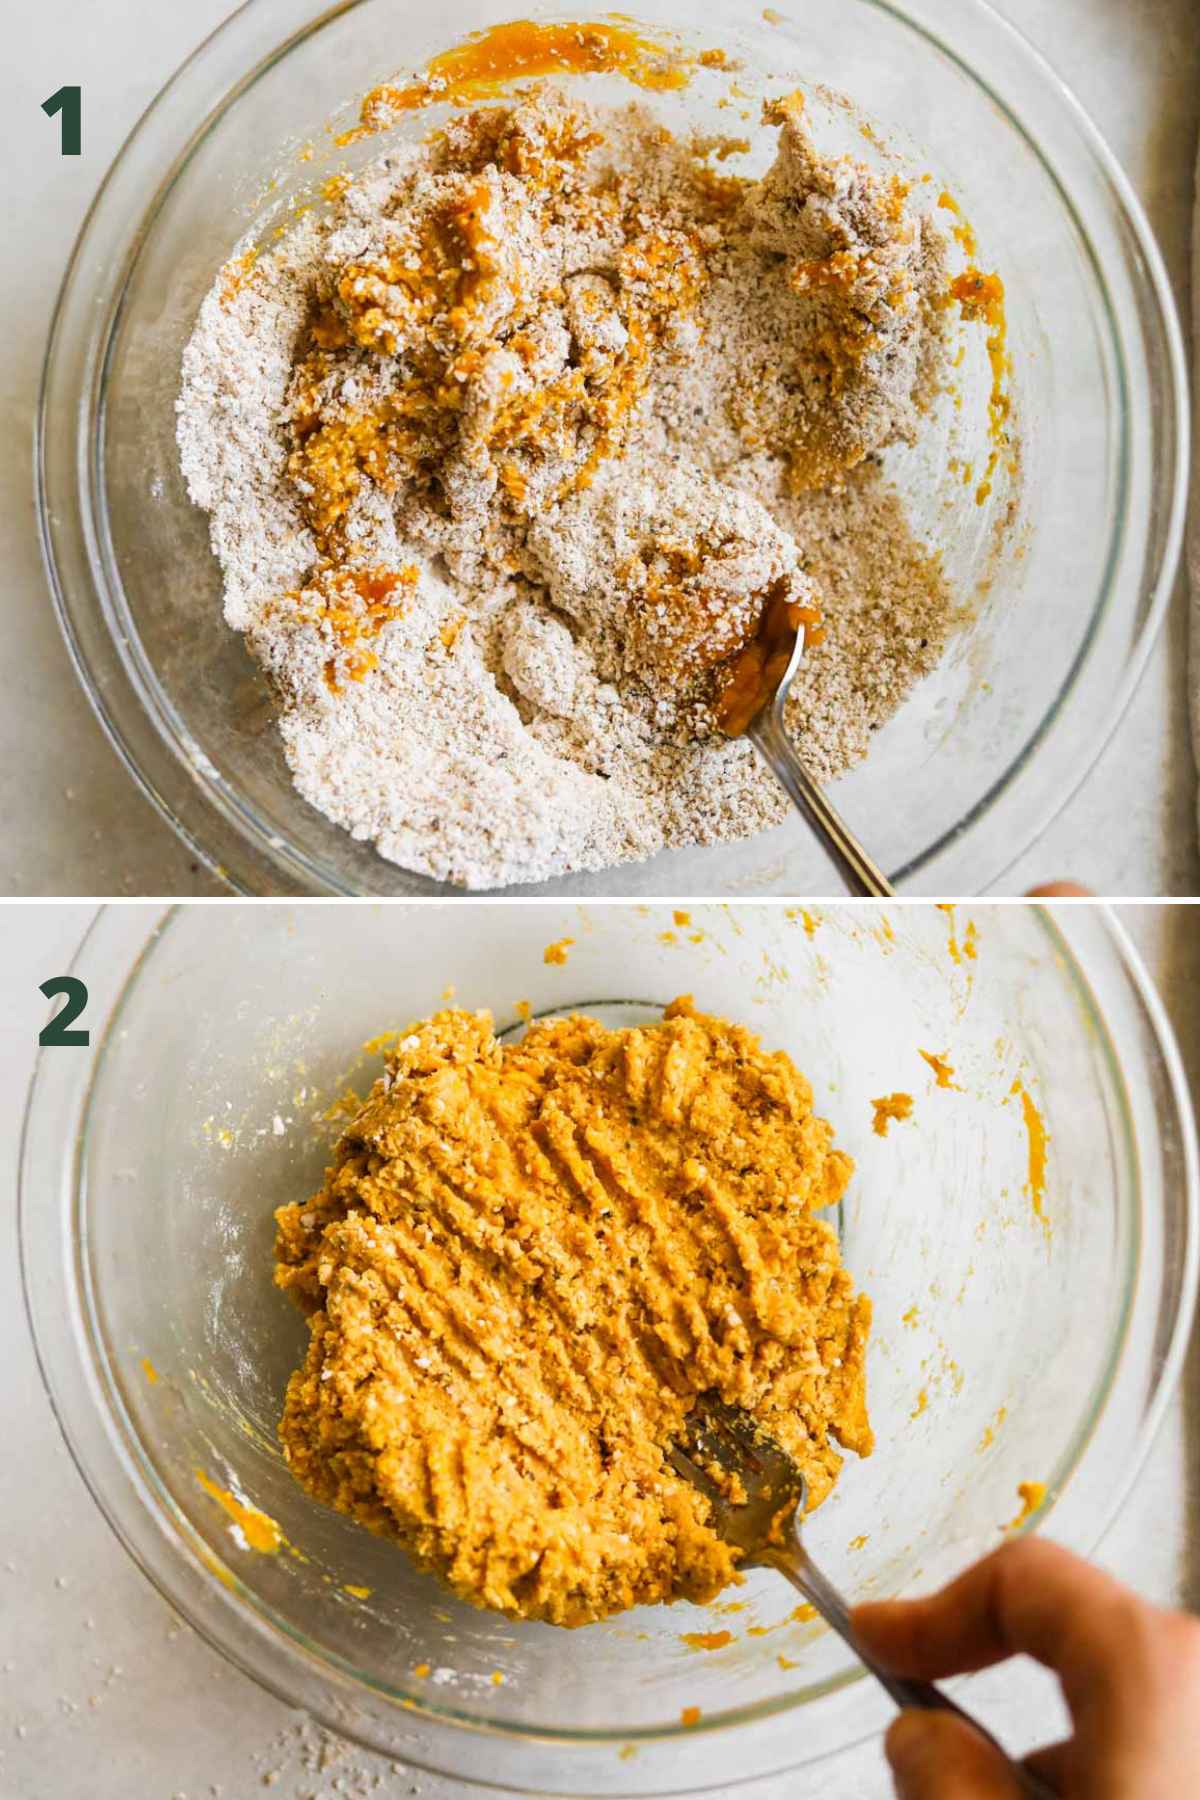 Steps to make homemade dog biscuits; mash pumpkin or sweet potato, oat flour, and natural peanut butter until it forms a smooth dough.